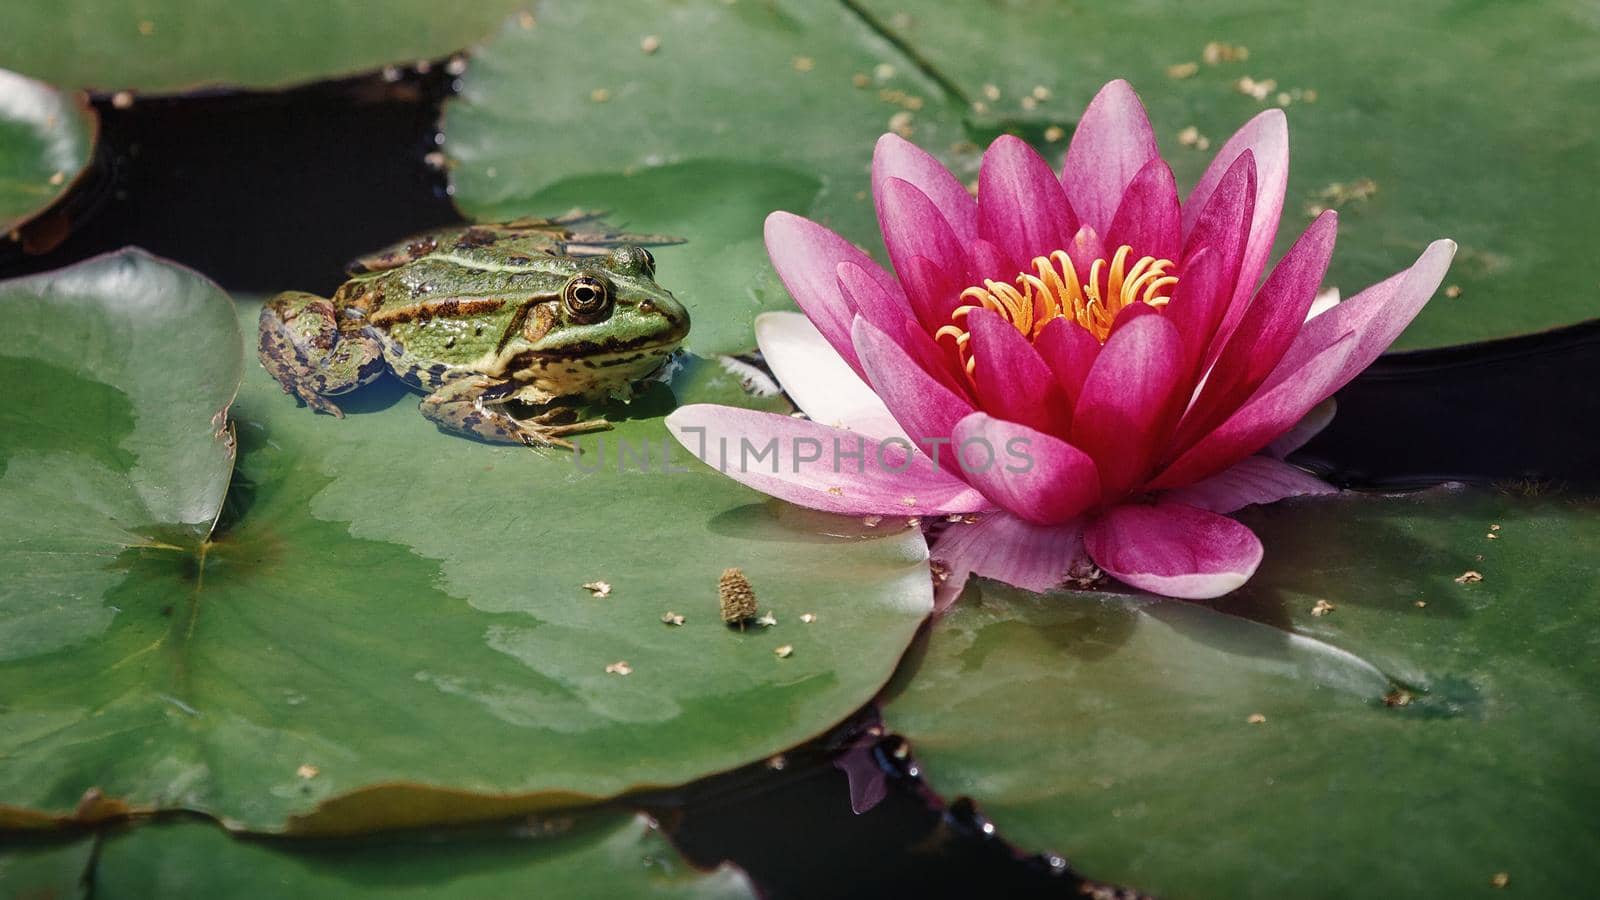 The green frog of pond is sitting on a green leaf, next to a pink big lily flower. by Lincikas